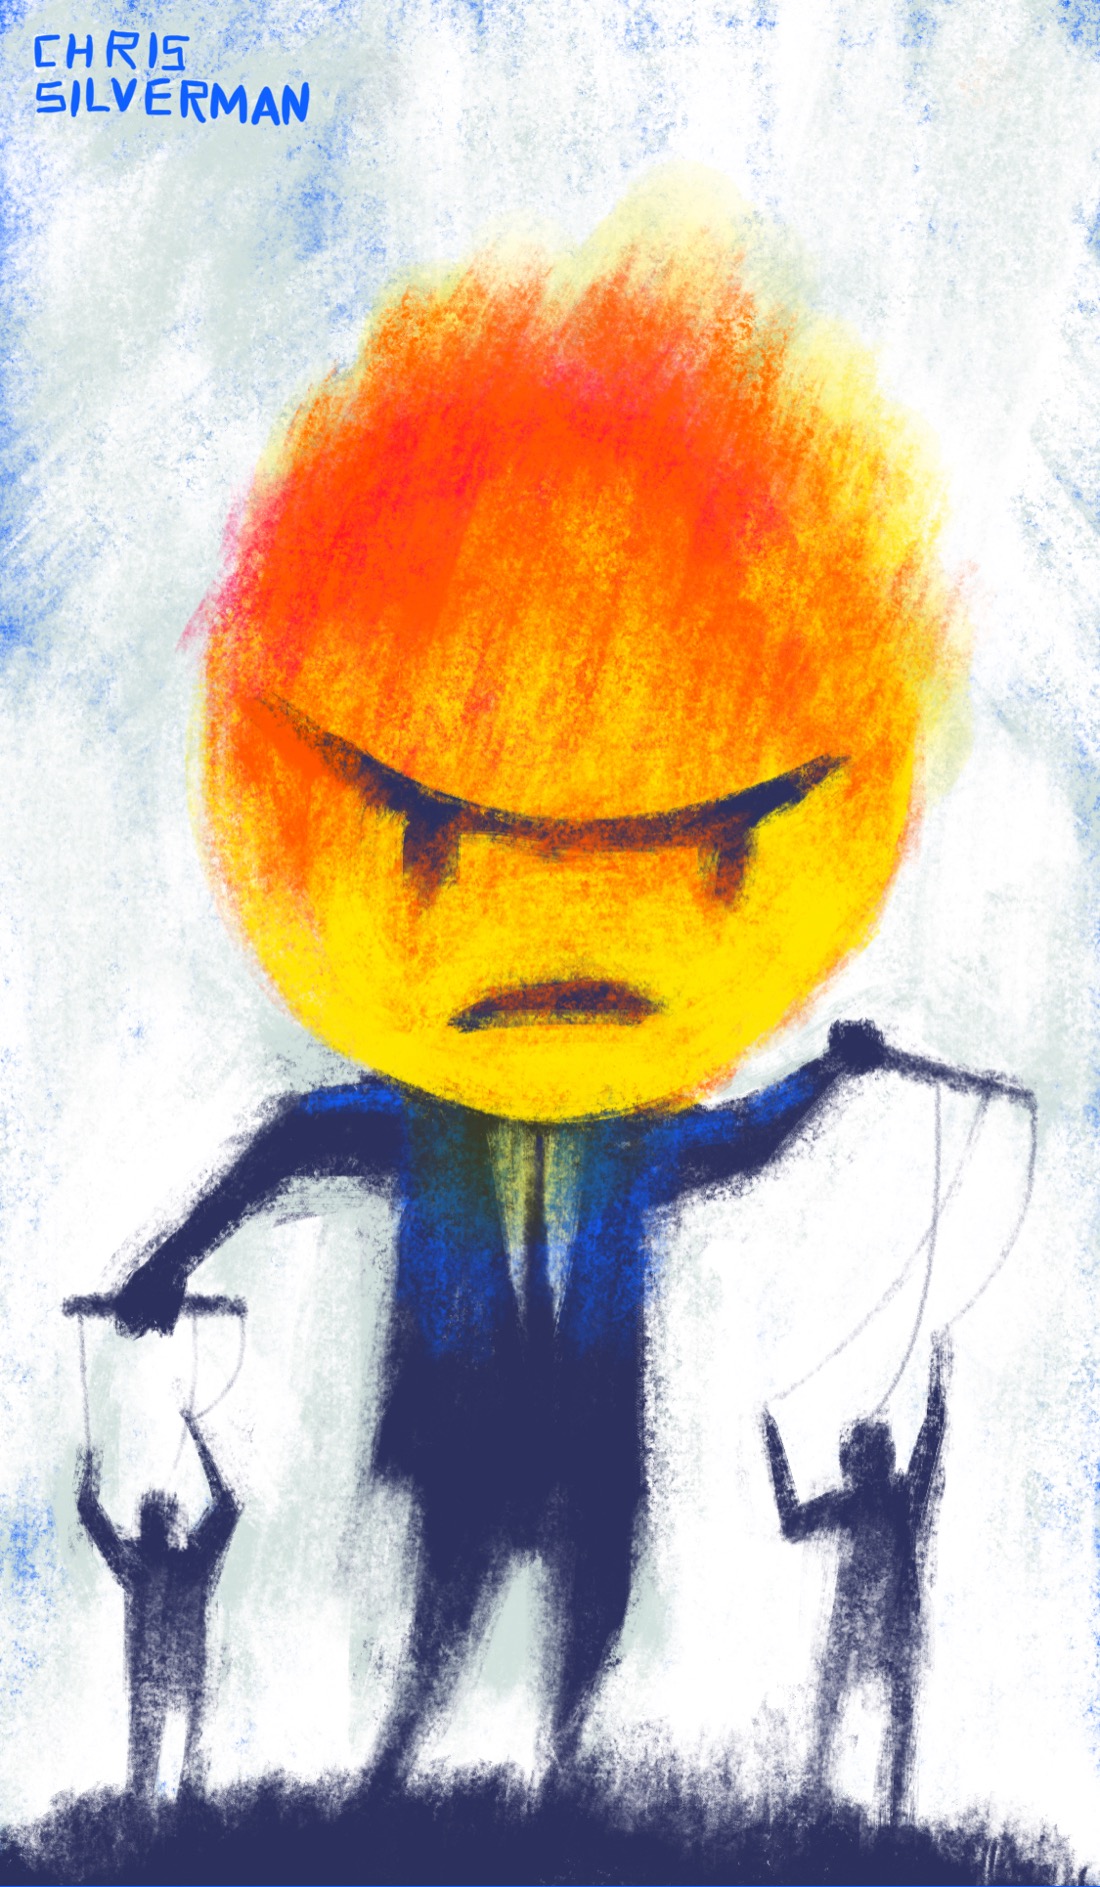 A person wearing a sharp blue suit and tie stands, arms akimbo, controlling a small marionette-figure in each hand. The person's head is a giant rage emoji, styled to look like the one used by Facebook: a scowling icon with the top part flushed red-orange, flames appearing to leap from the top. The background is white, and the marionettes and the ground they stand on is a dark navy blue.